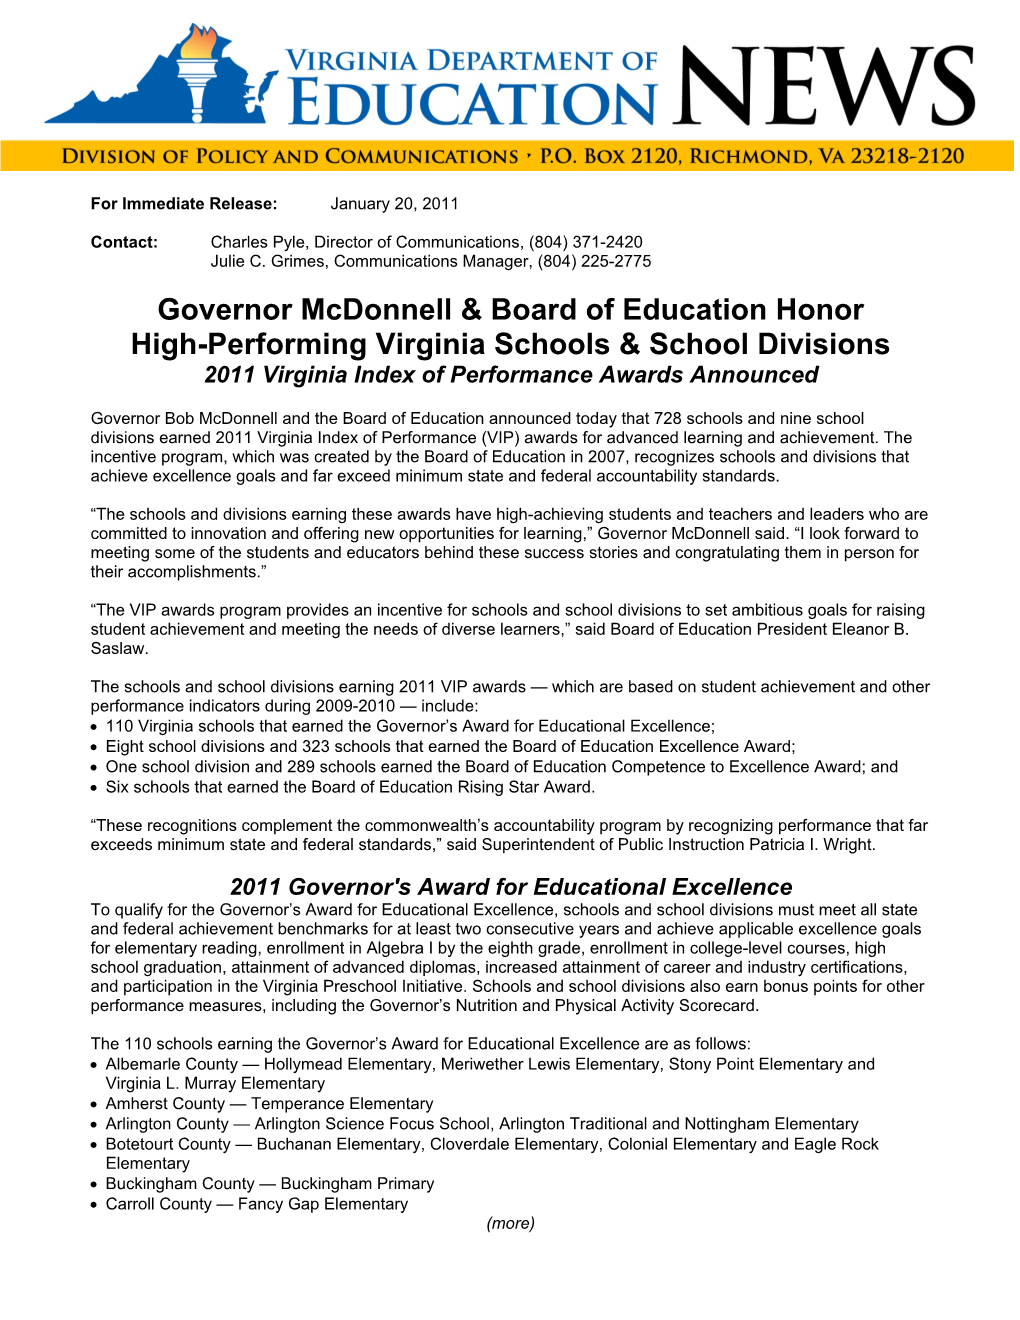 Governor Mcdonnell & Board of Education Honor High-Performing